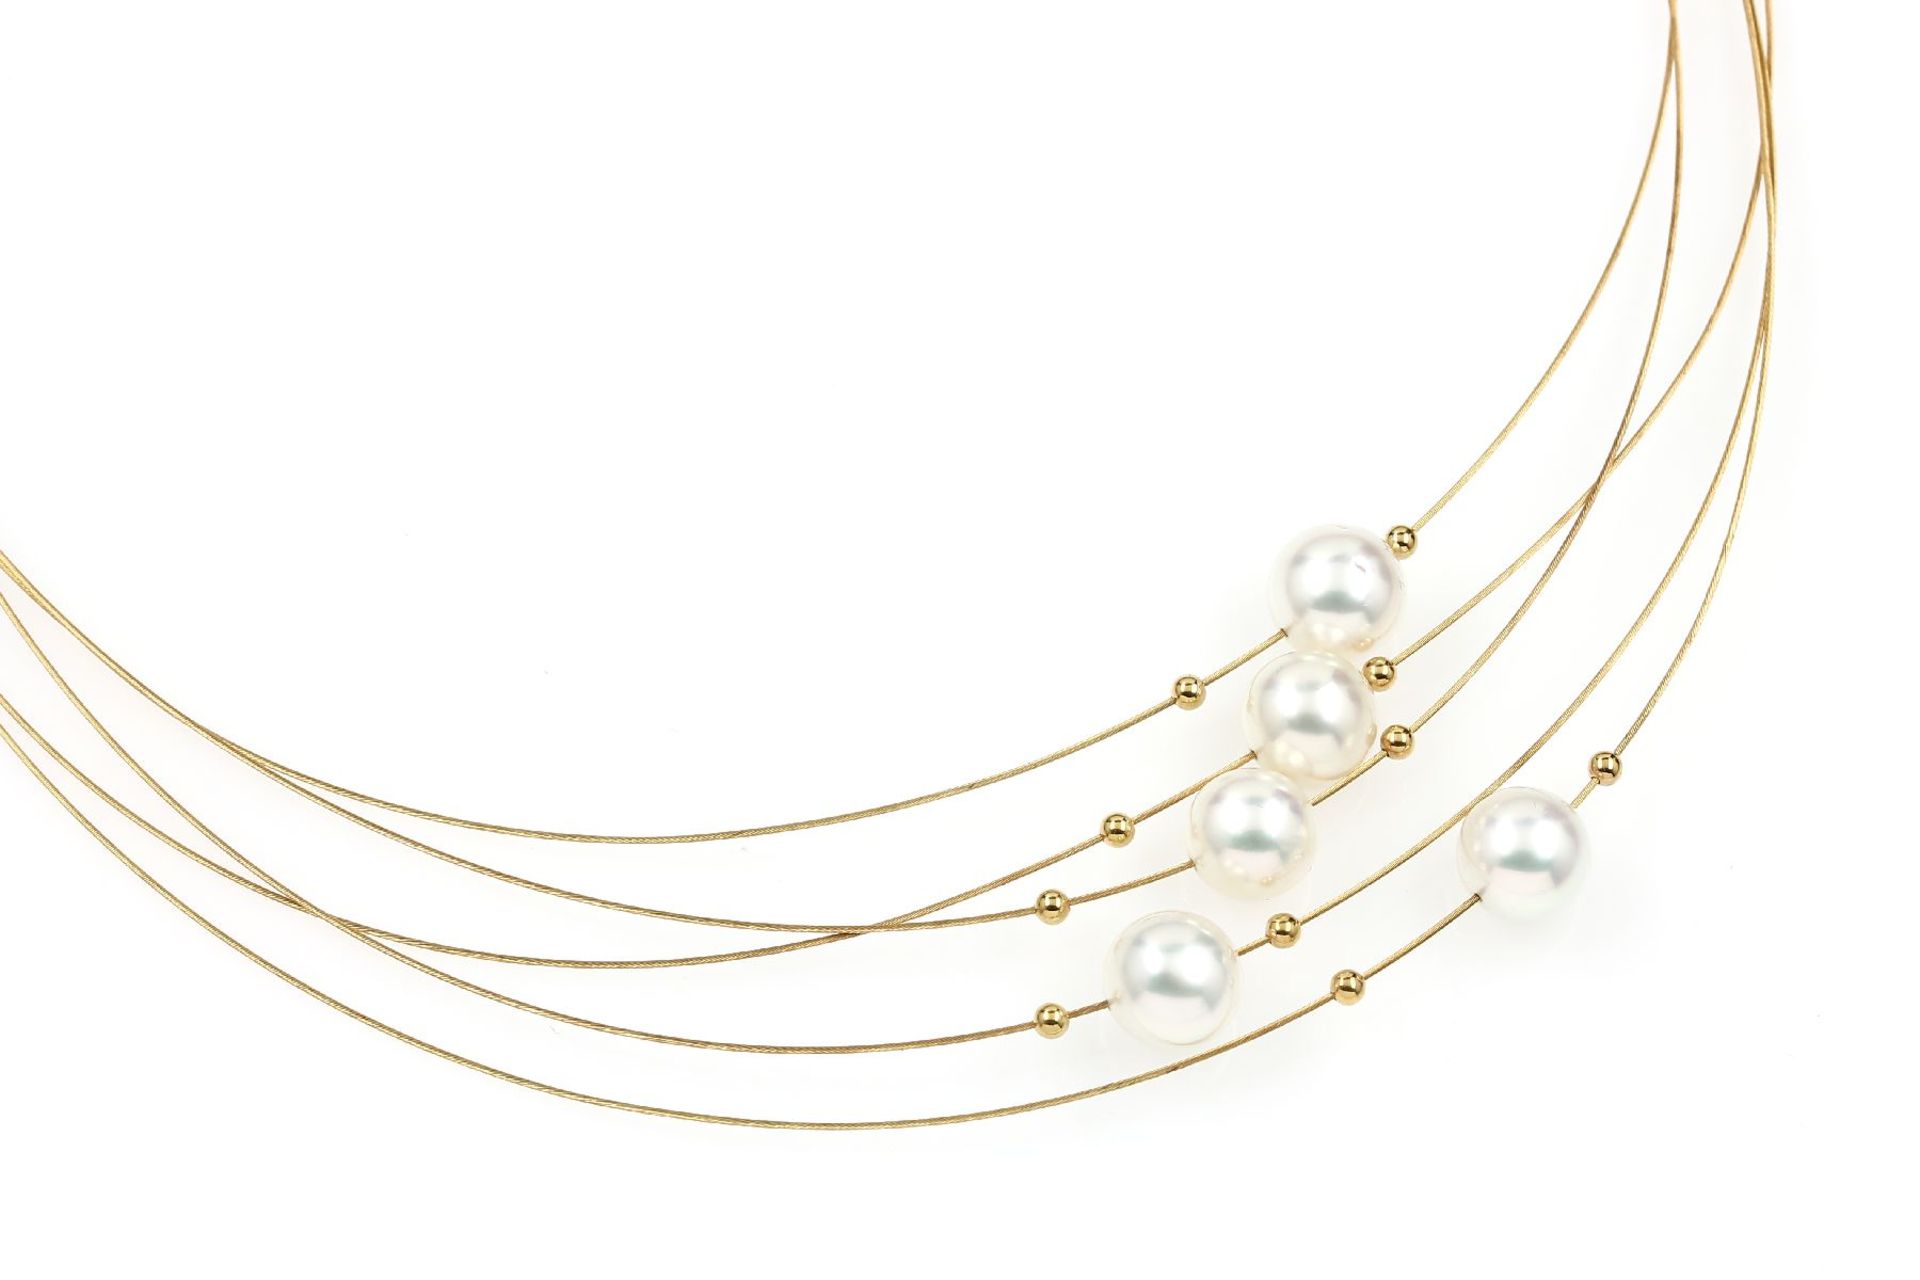 5-rowed 18 kt gold necklace with south seas pearls, YG 750/000, 5 white cultured south seas pearls - Bild 2 aus 2